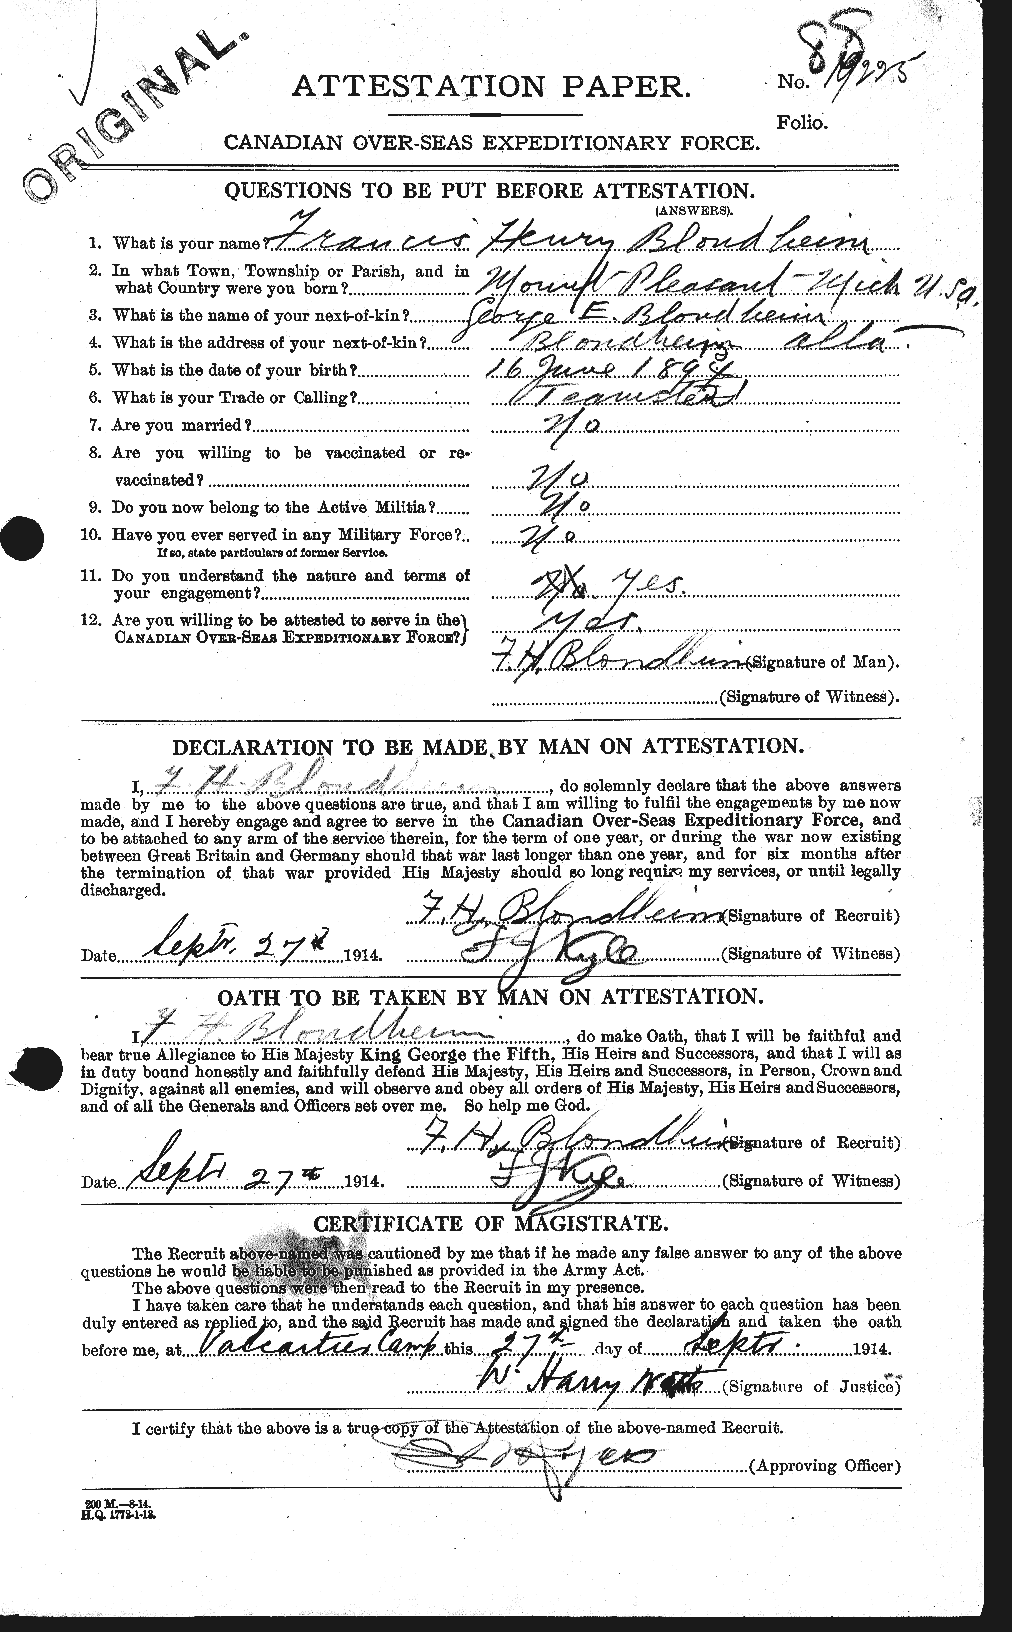 Personnel Records of the First World War - CEF 248504a